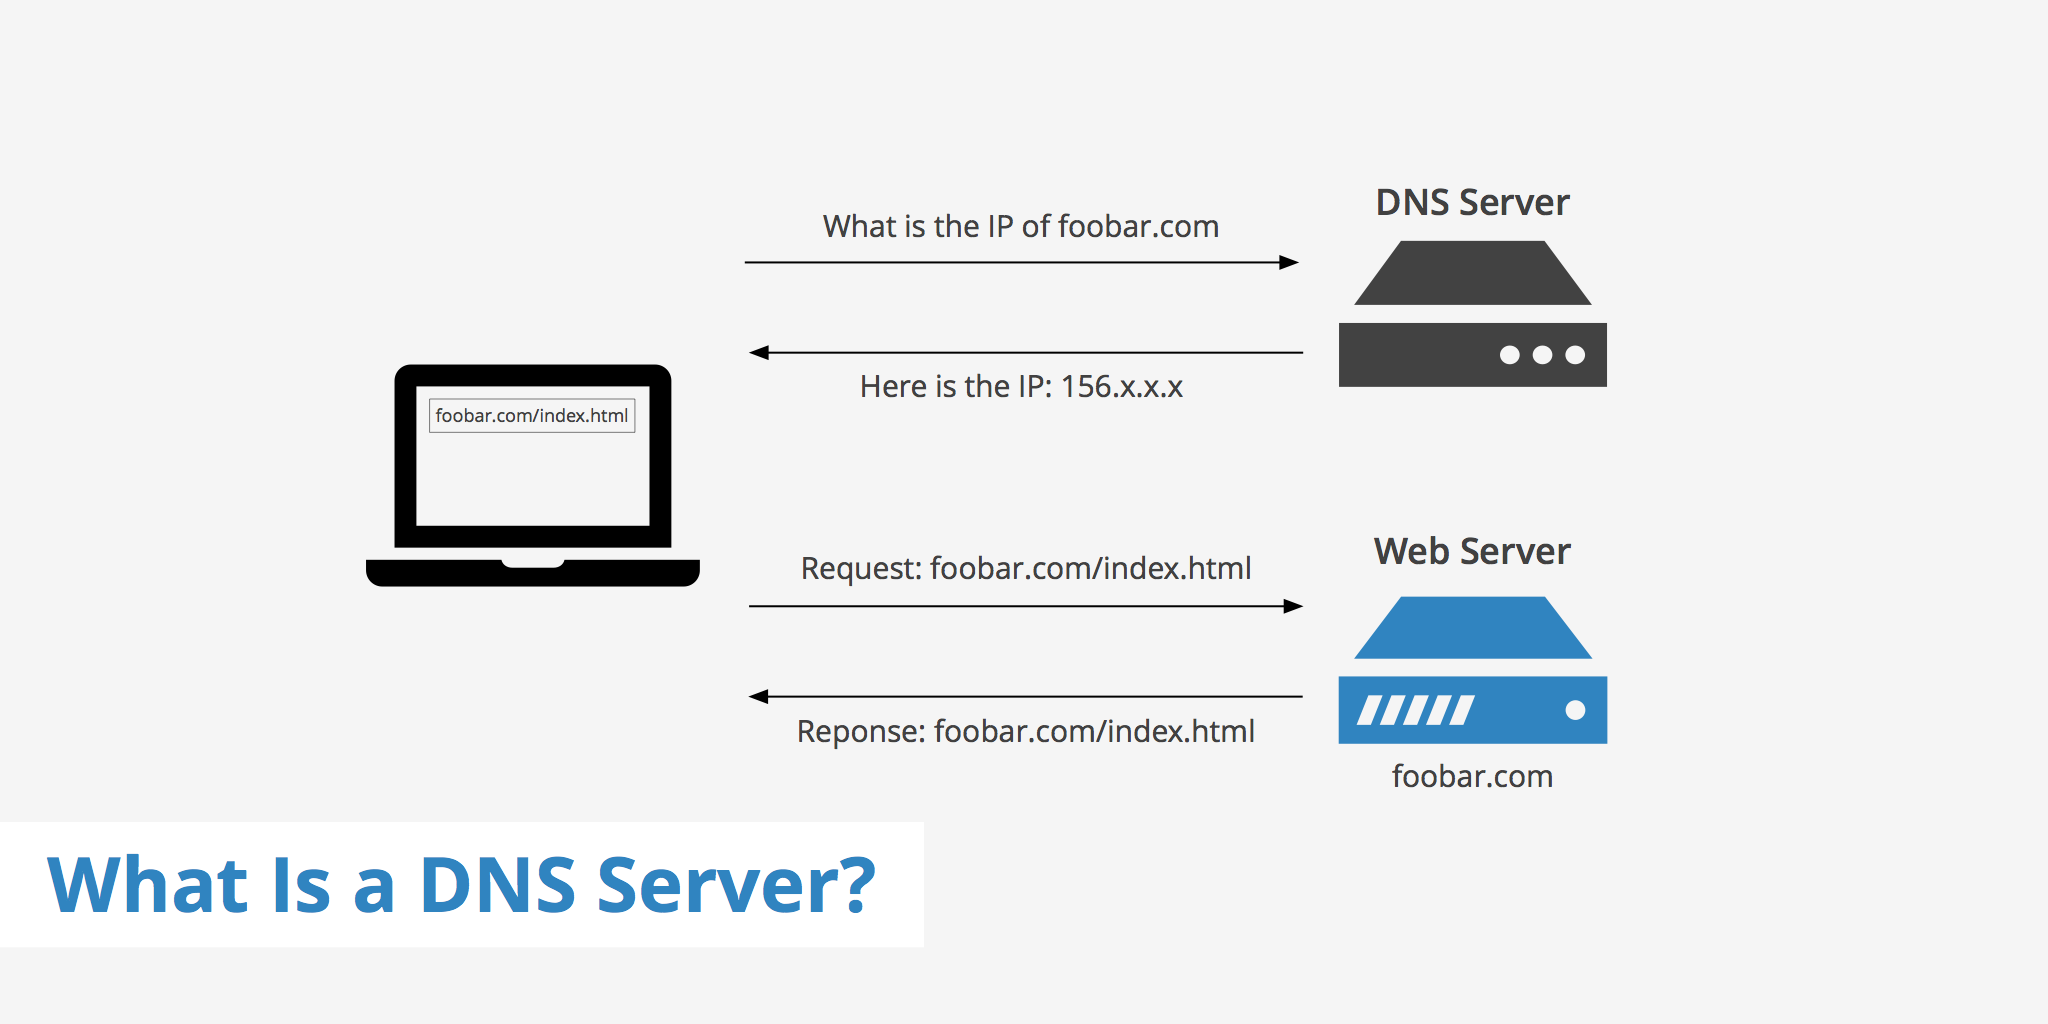 What Is a DNS Server?